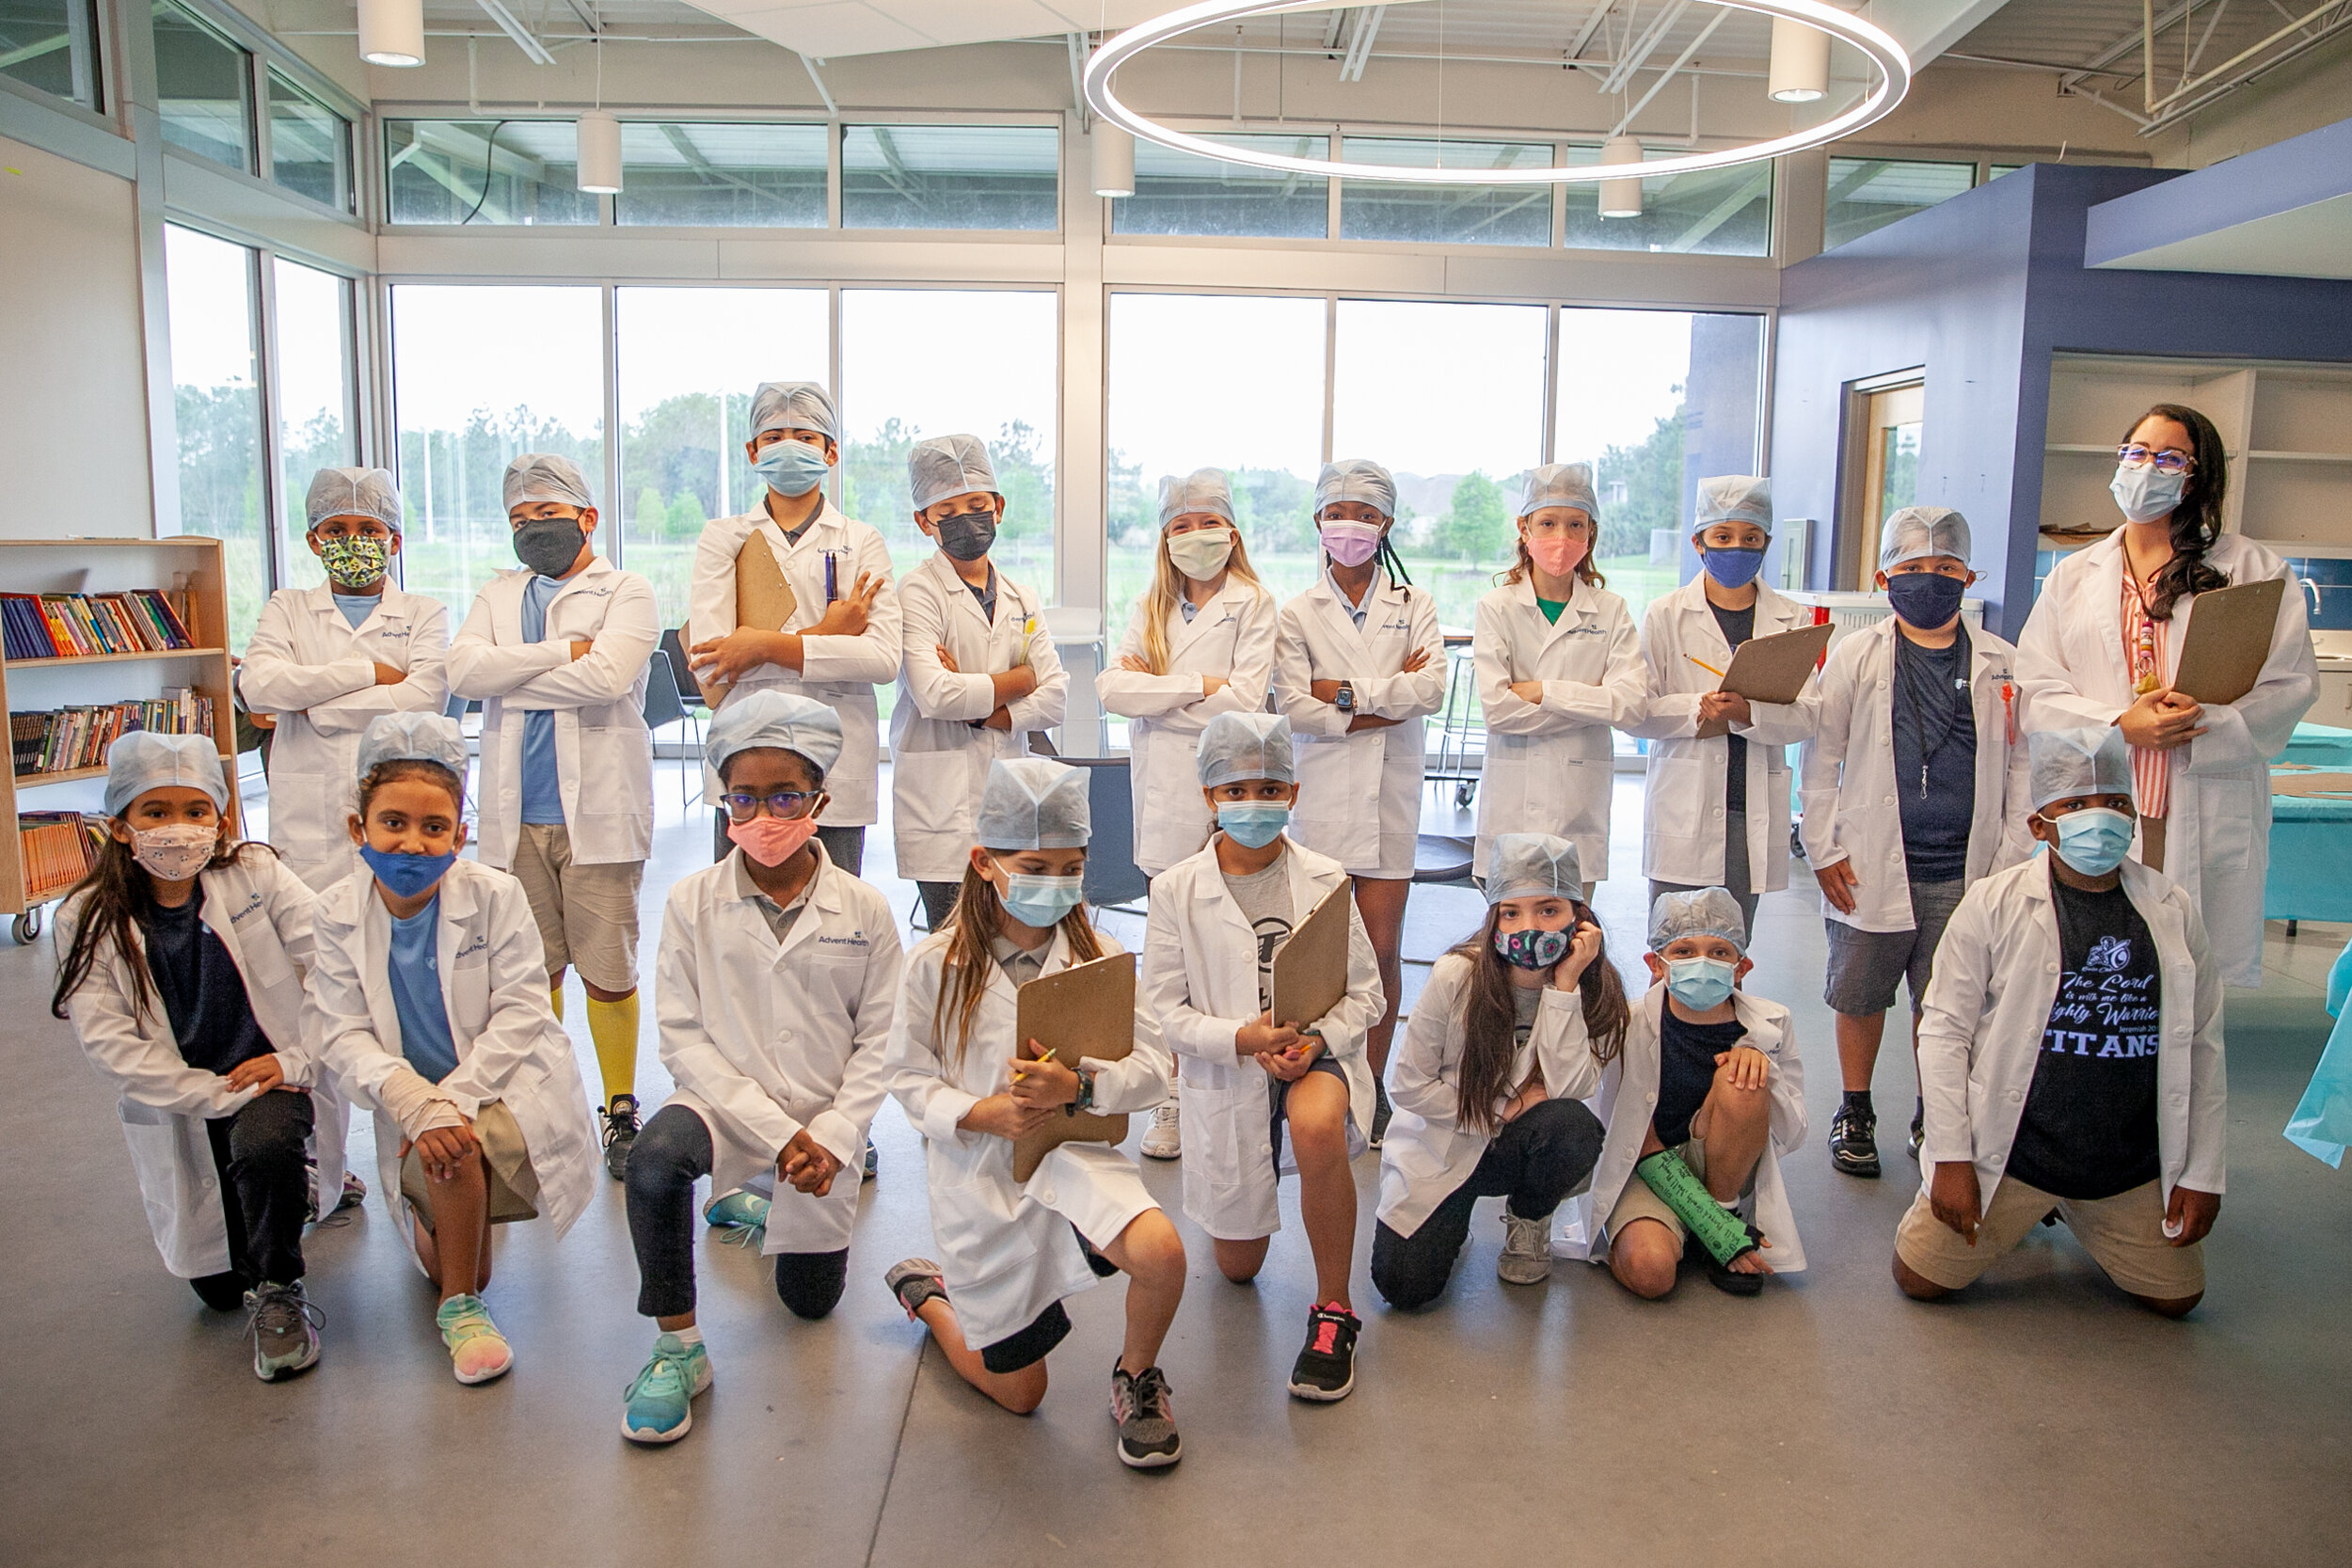 Adventist health system academy tampa shows at the baxter